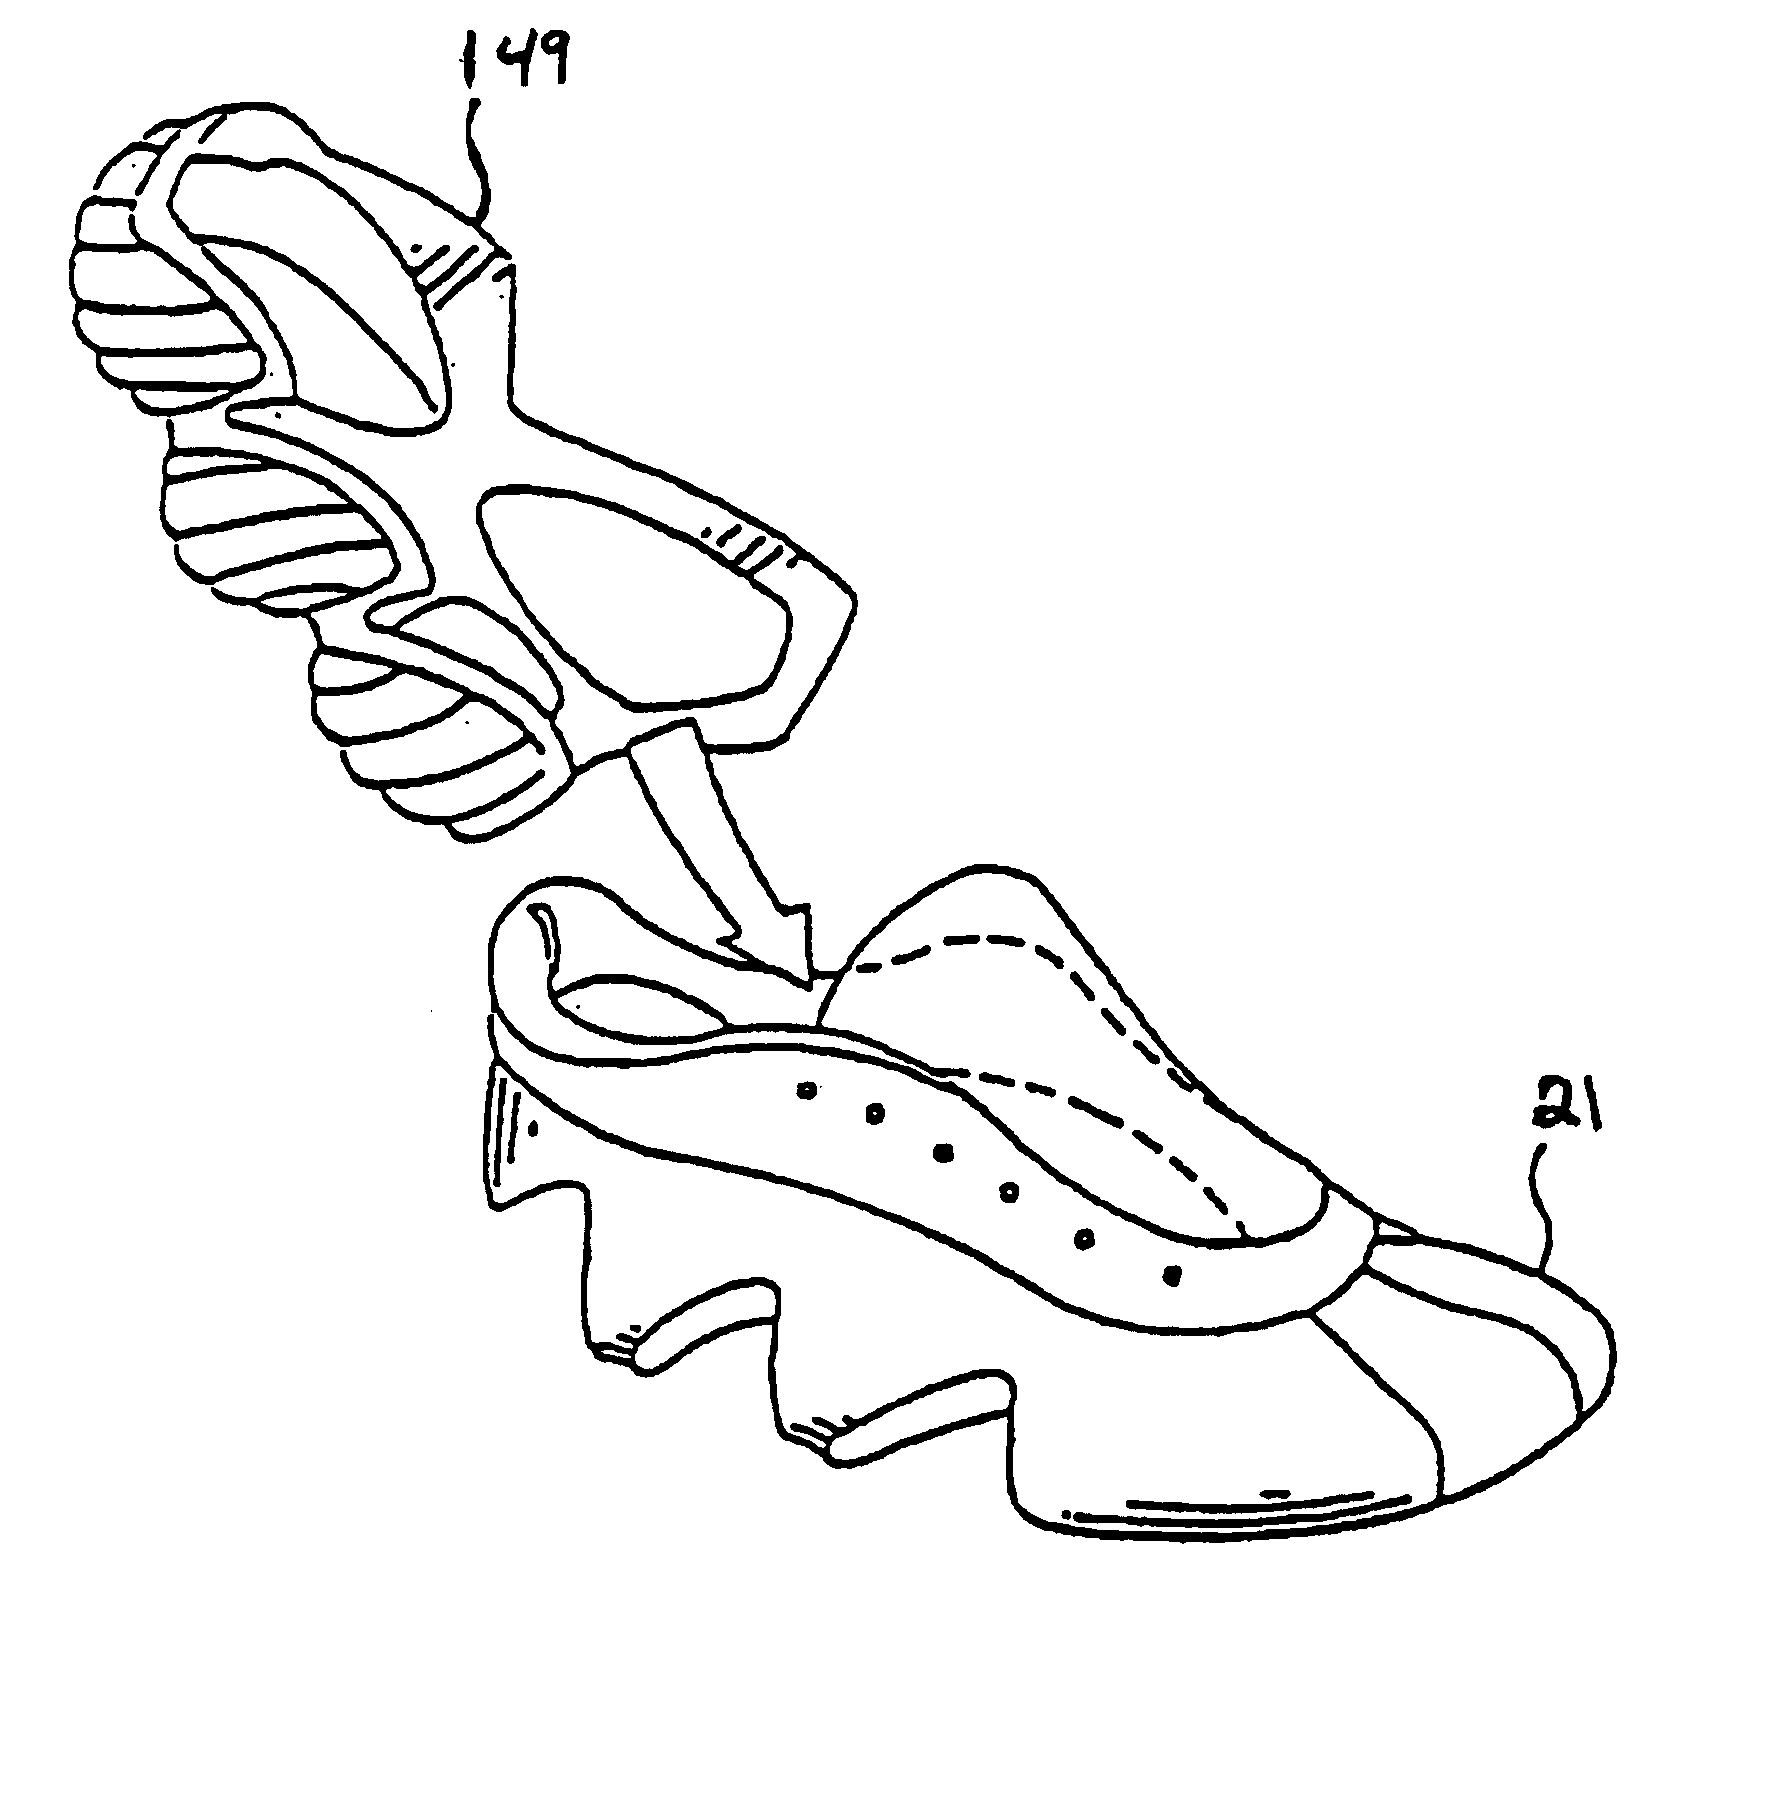 Shoe sole orthotic structures and computer controlled compartments